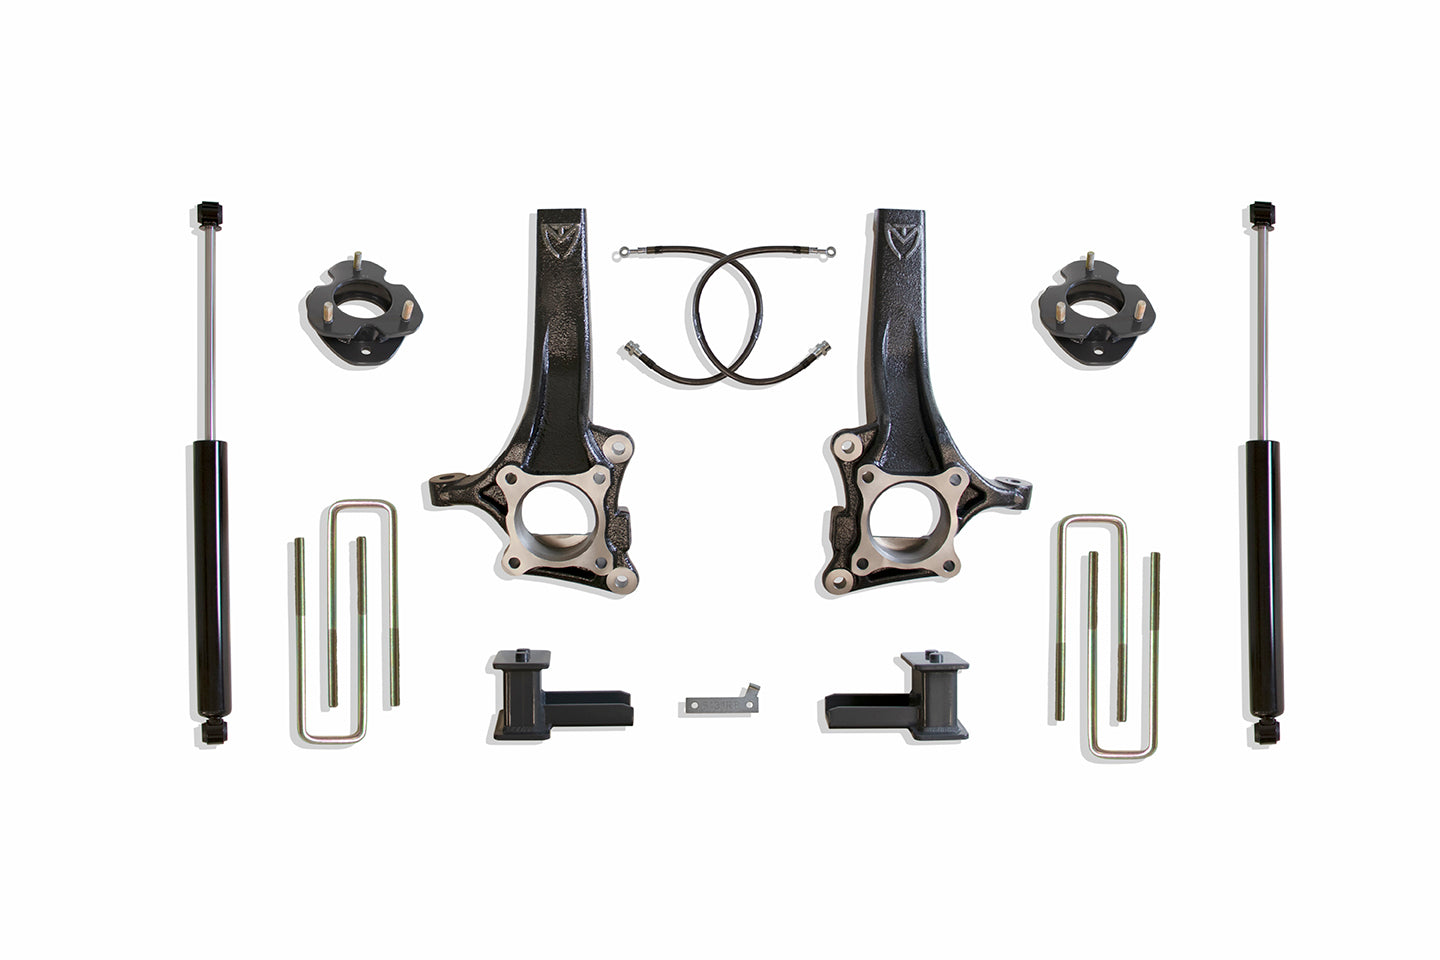 MaxTrac Suspension 2009-2014 Ford F-150 2WD 6.5" Lift Kit Including Spindles Spacers Extended Brake Lines Blocks U-Bolts & Max Trac Rear Shocks K883464